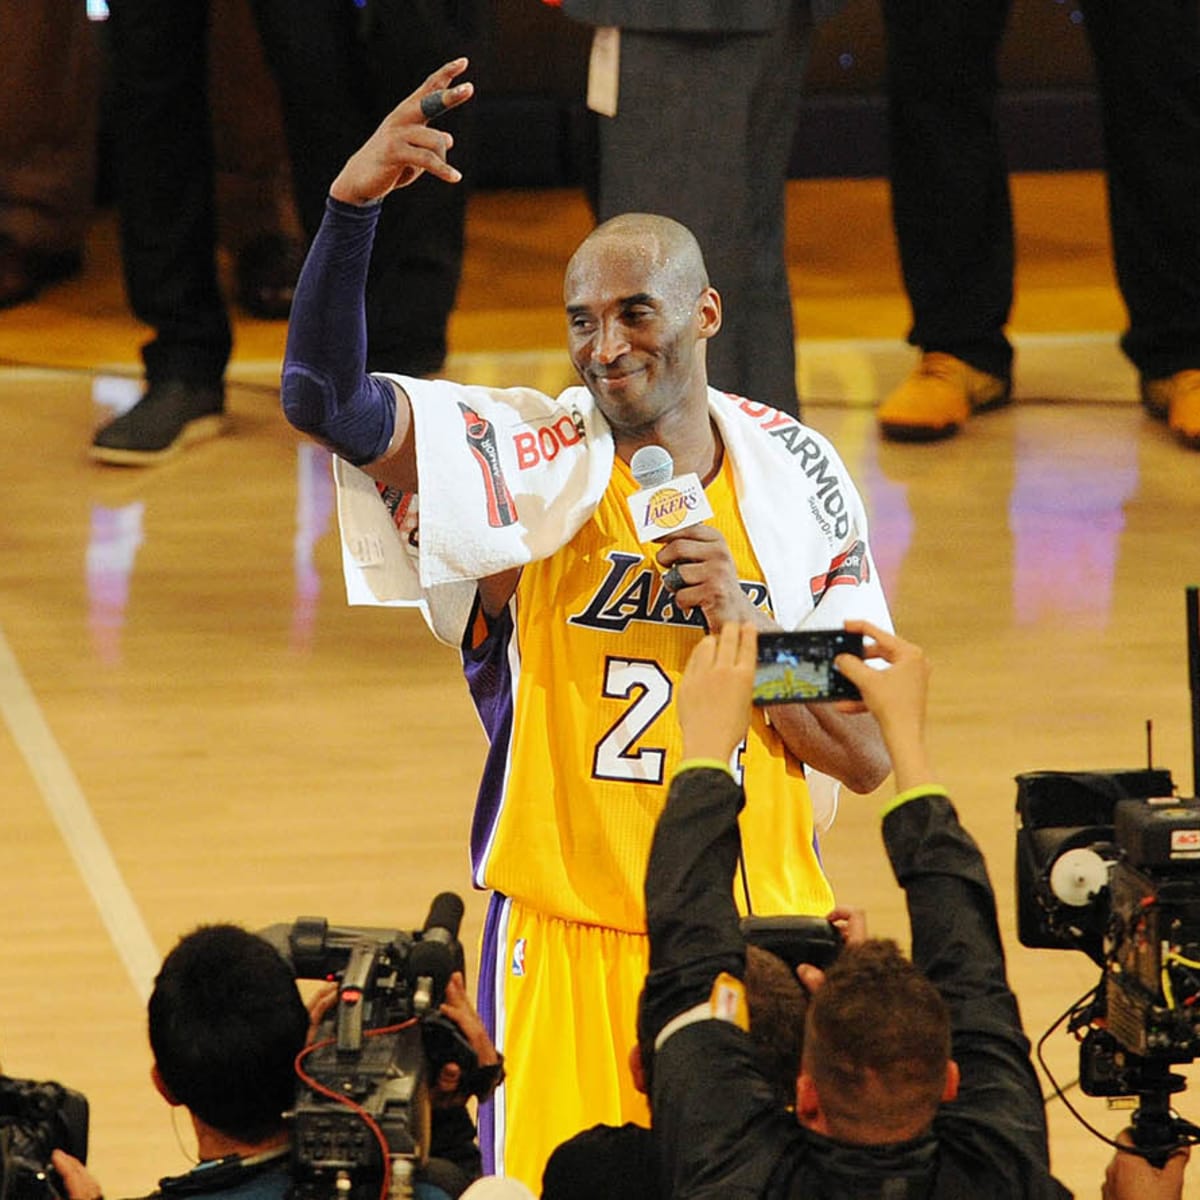 Kobe Bryant's best style moments through the years